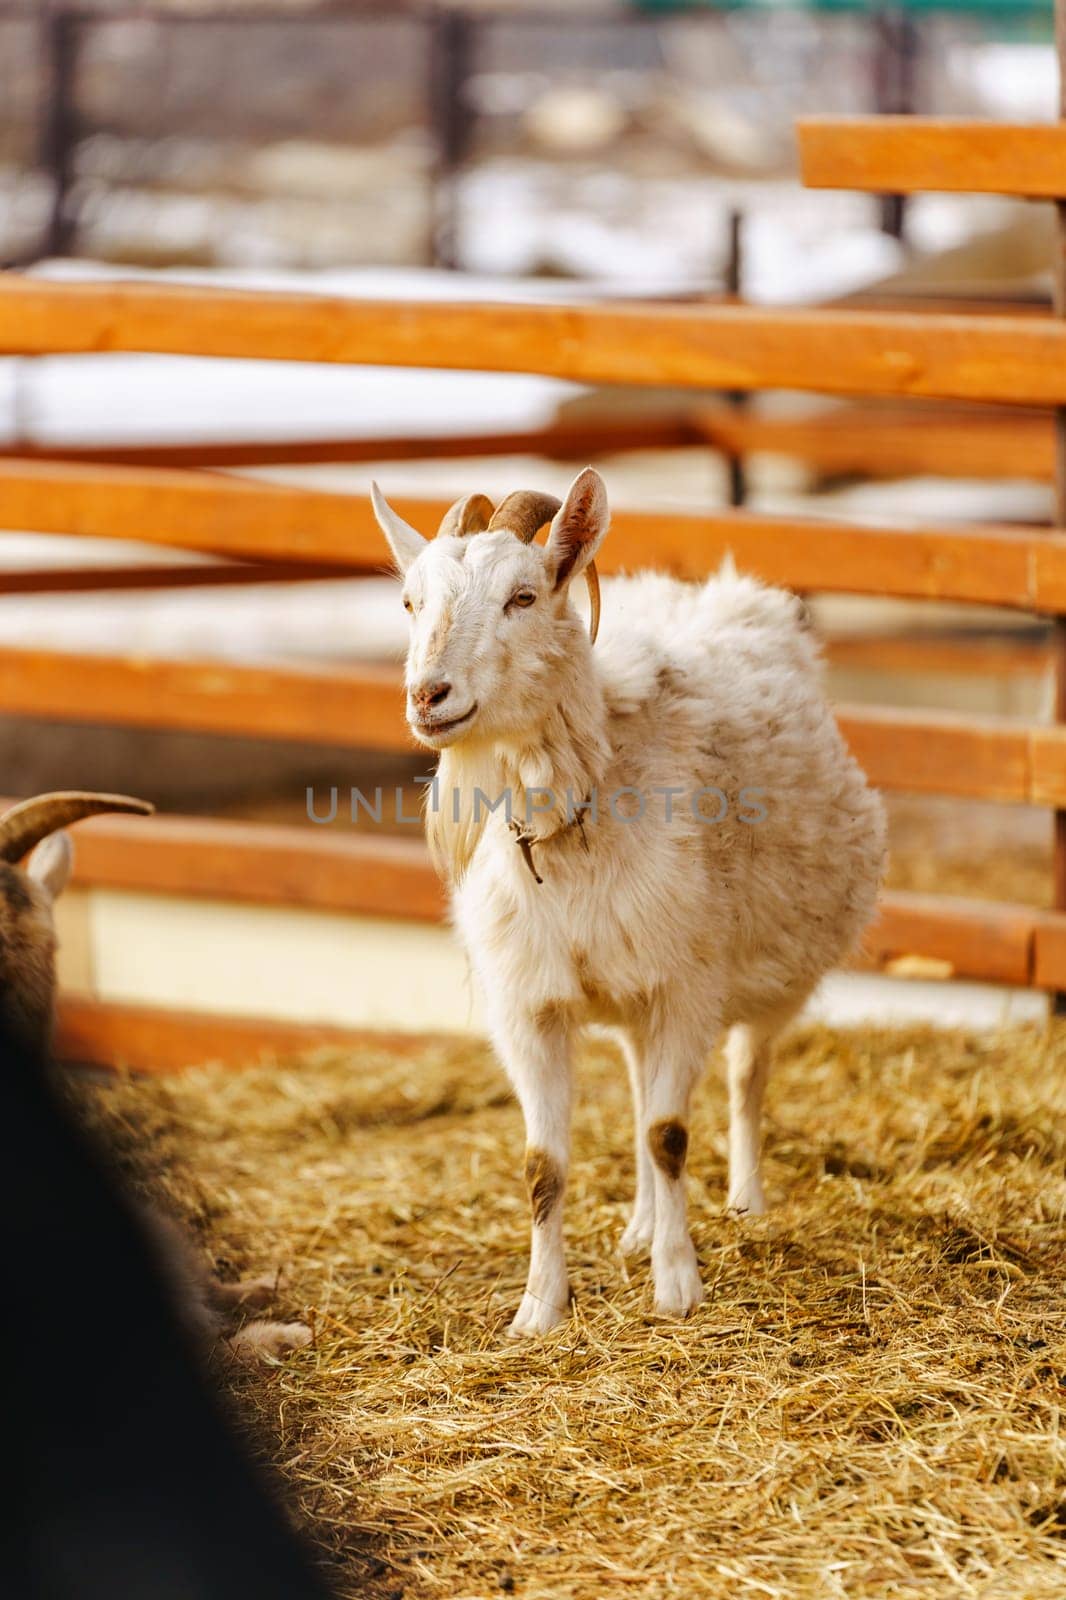 Goat stands gracefully on a tall pile of golden hay, surveying its surroundings with curiosity and poise.